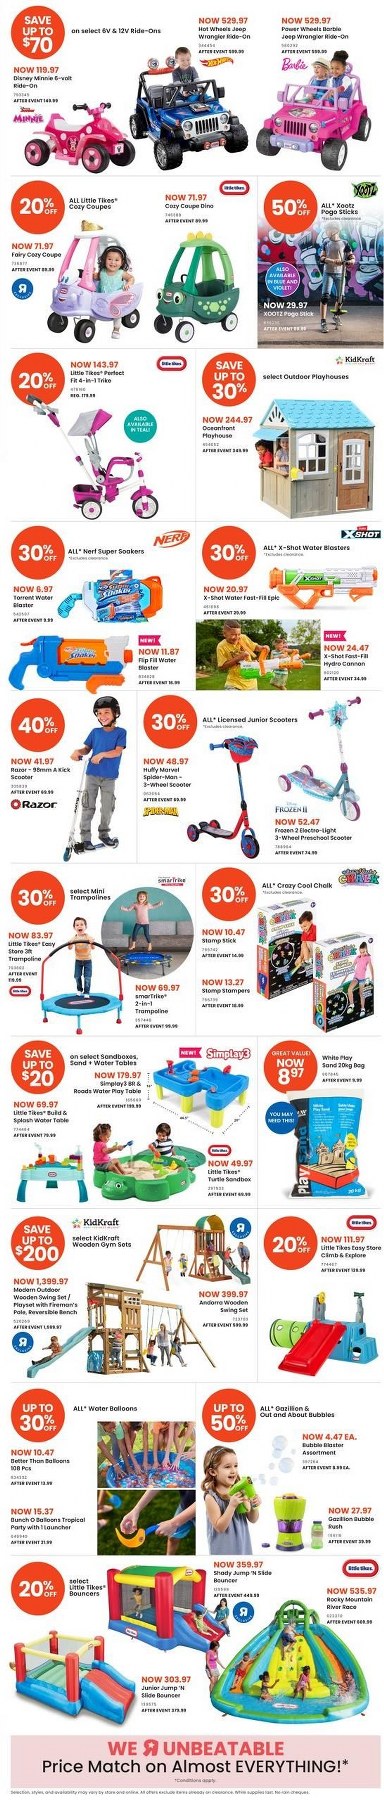 toys r us flyer june 27 to july 10 2